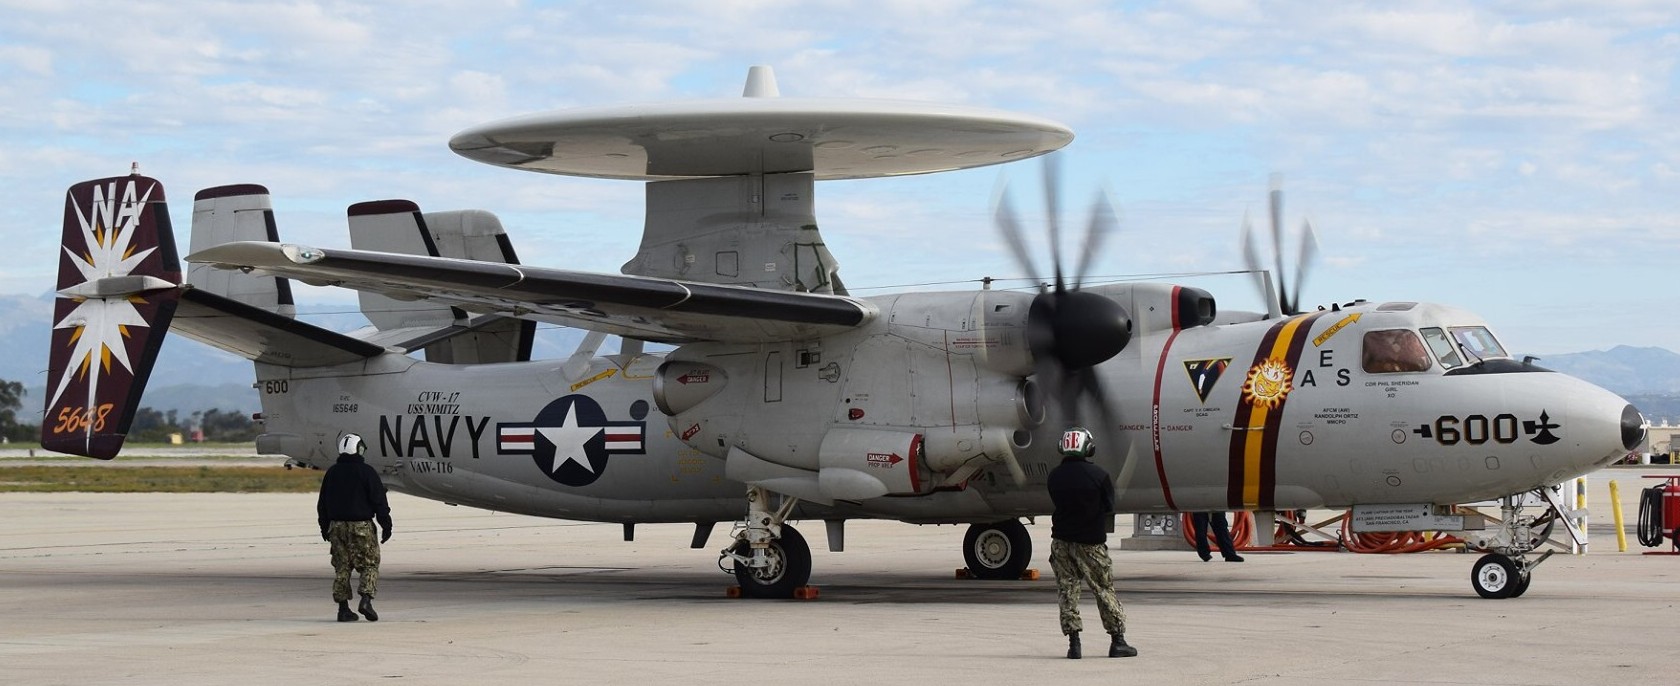 vaw-116 sun kings airborne command control squadron carrier early warning cvw-17 naval base ventura county point mugu 83